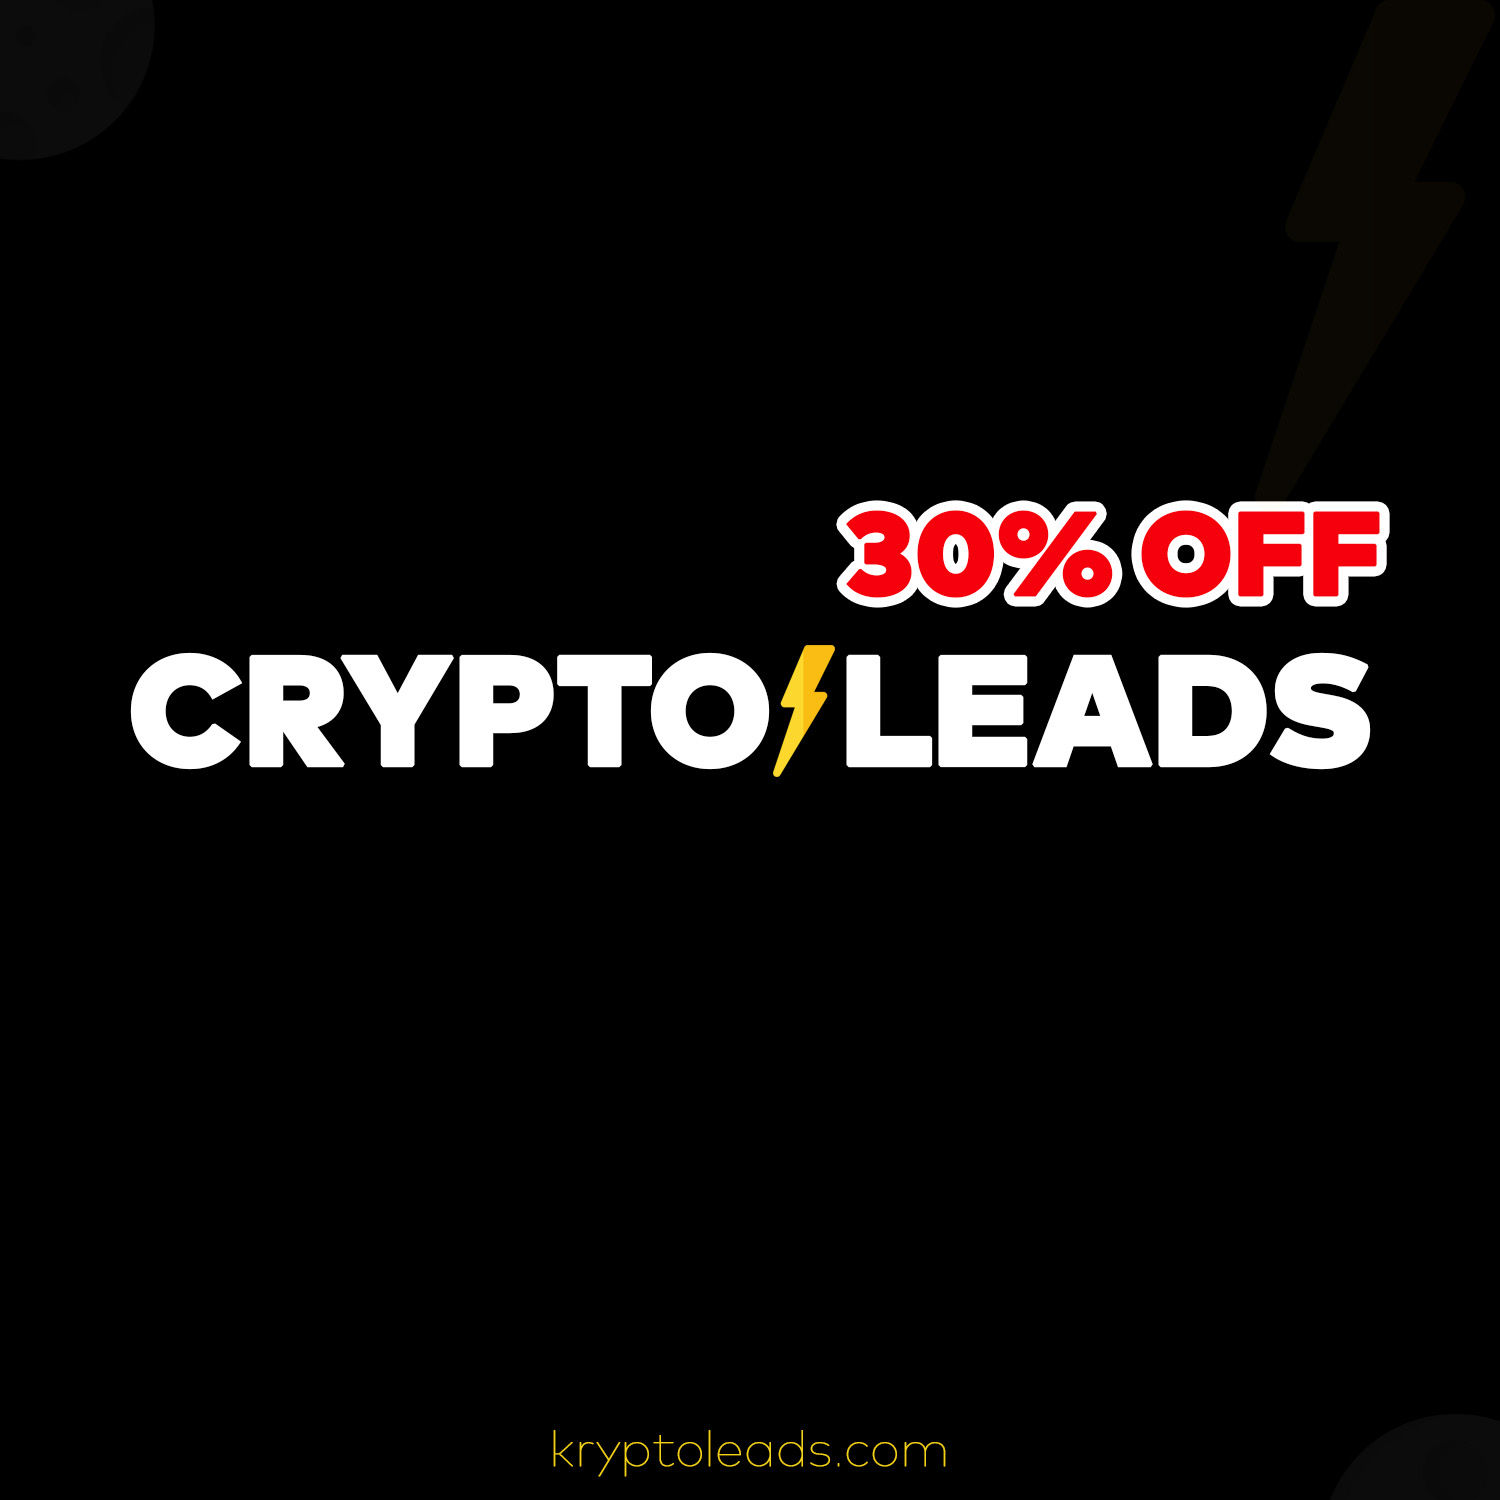 250K HOTMAIL CRYPTO LEADS (30% OFF)